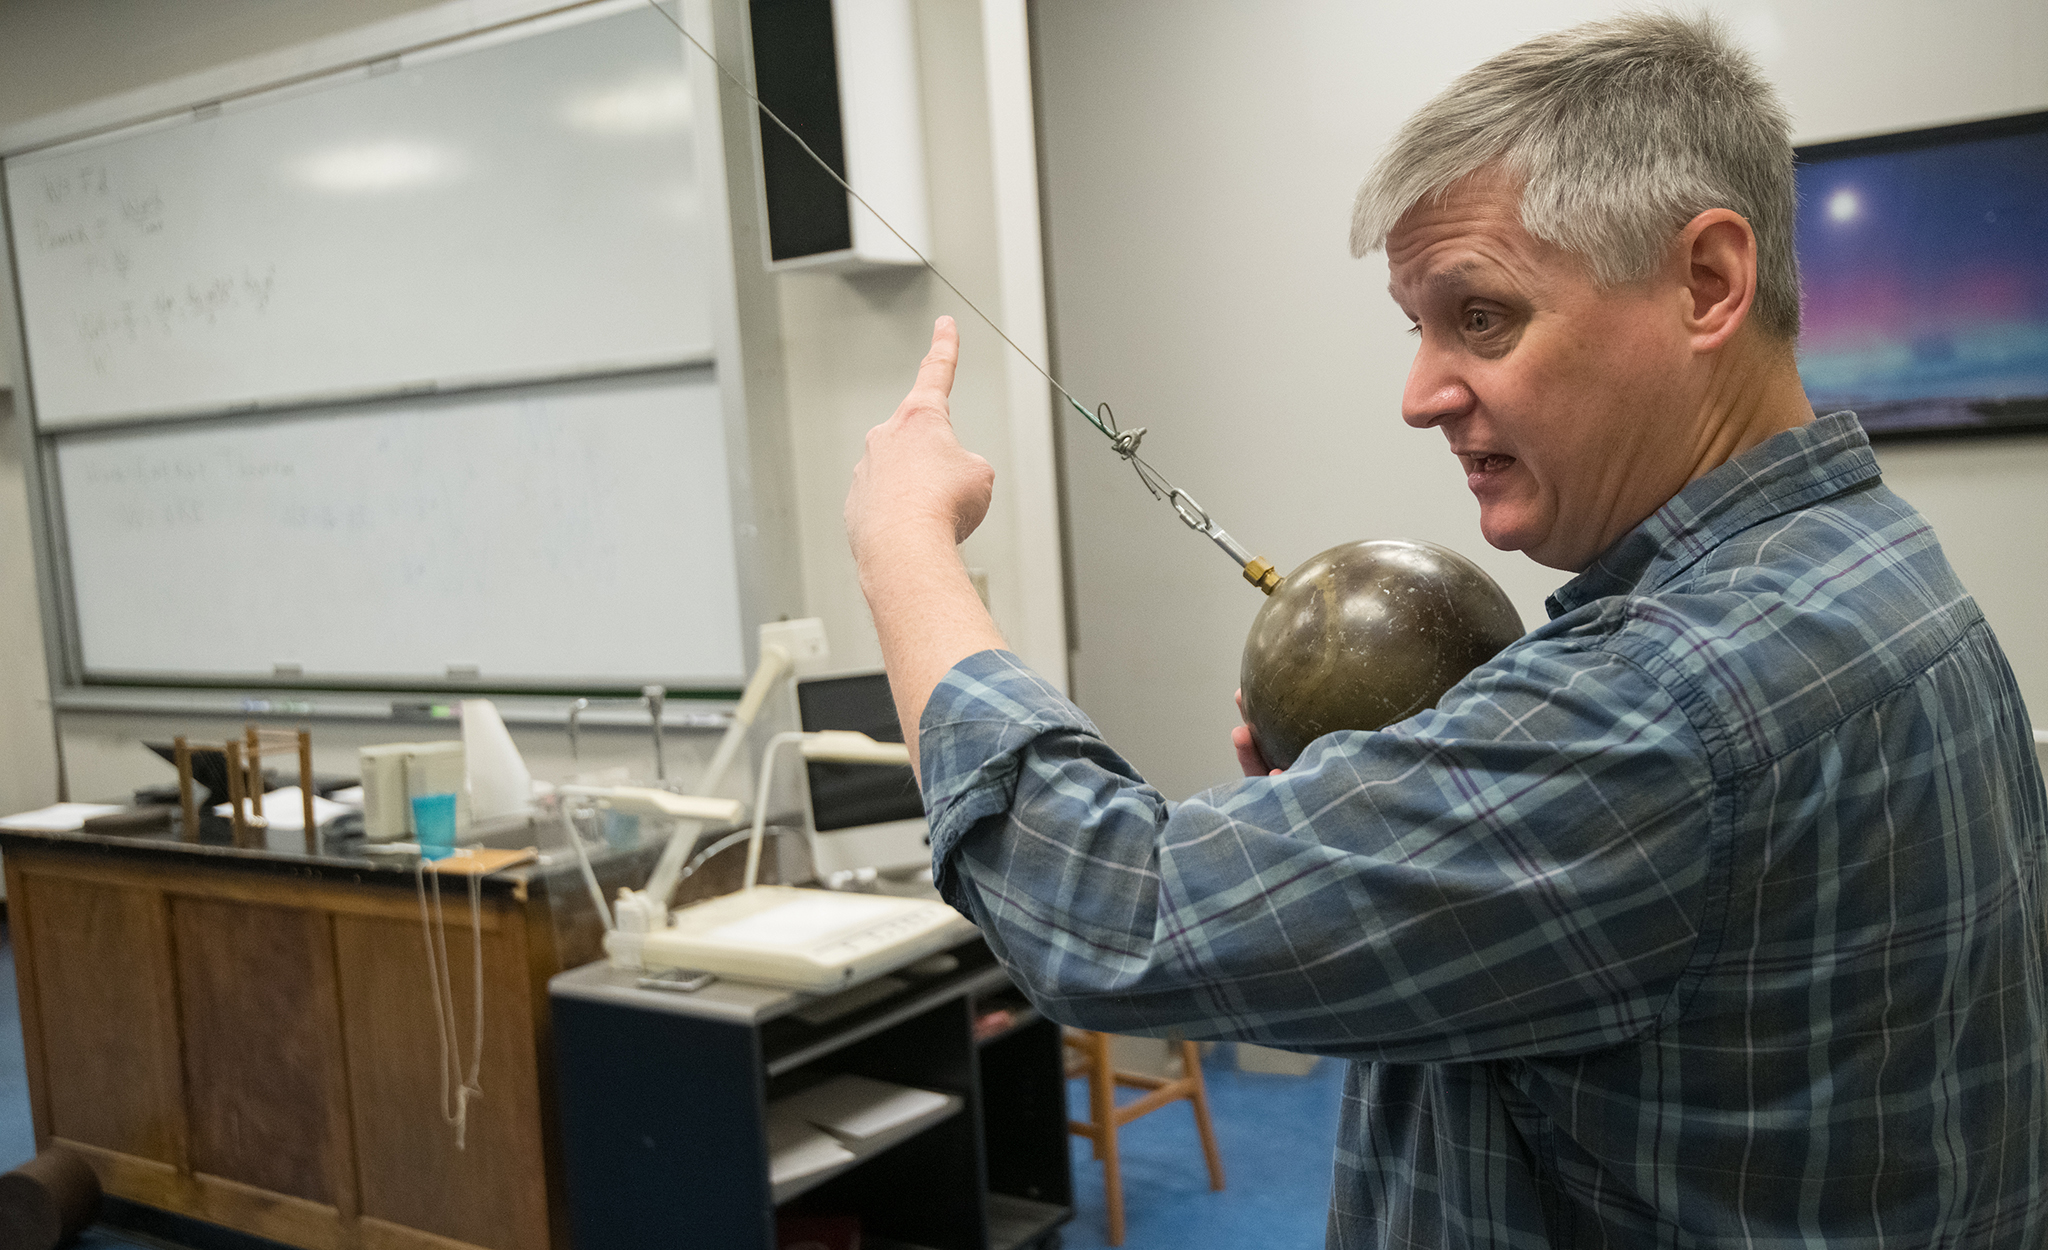 Breese Quinn, professor of physics and director of the university’s Multimessenger Astrophysics Center, demonstrates laws of physics to students in his classroom. For the last decade, Quinn and fellow UM researchers have been working with an international group at Fermilab, where a new measurement of the movement of subatomic particles could change the way physicists understand the universe. Photo by Kevin Bain/Ole Miss Digital Imaging Services